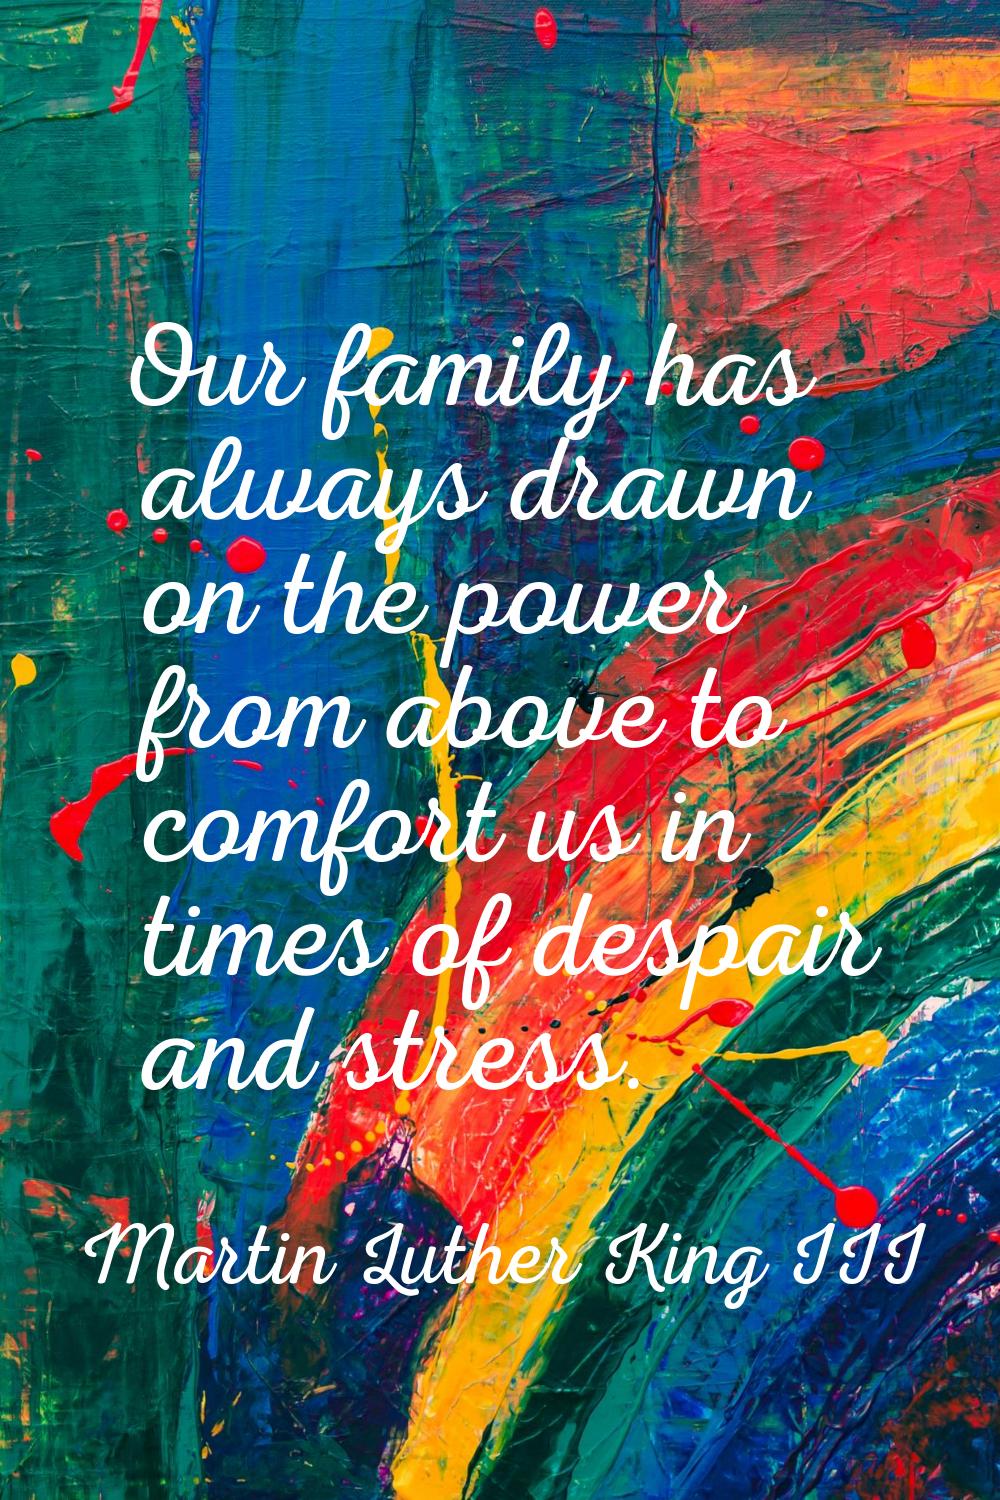 Our family has always drawn on the power from above to comfort us in times of despair and stress.